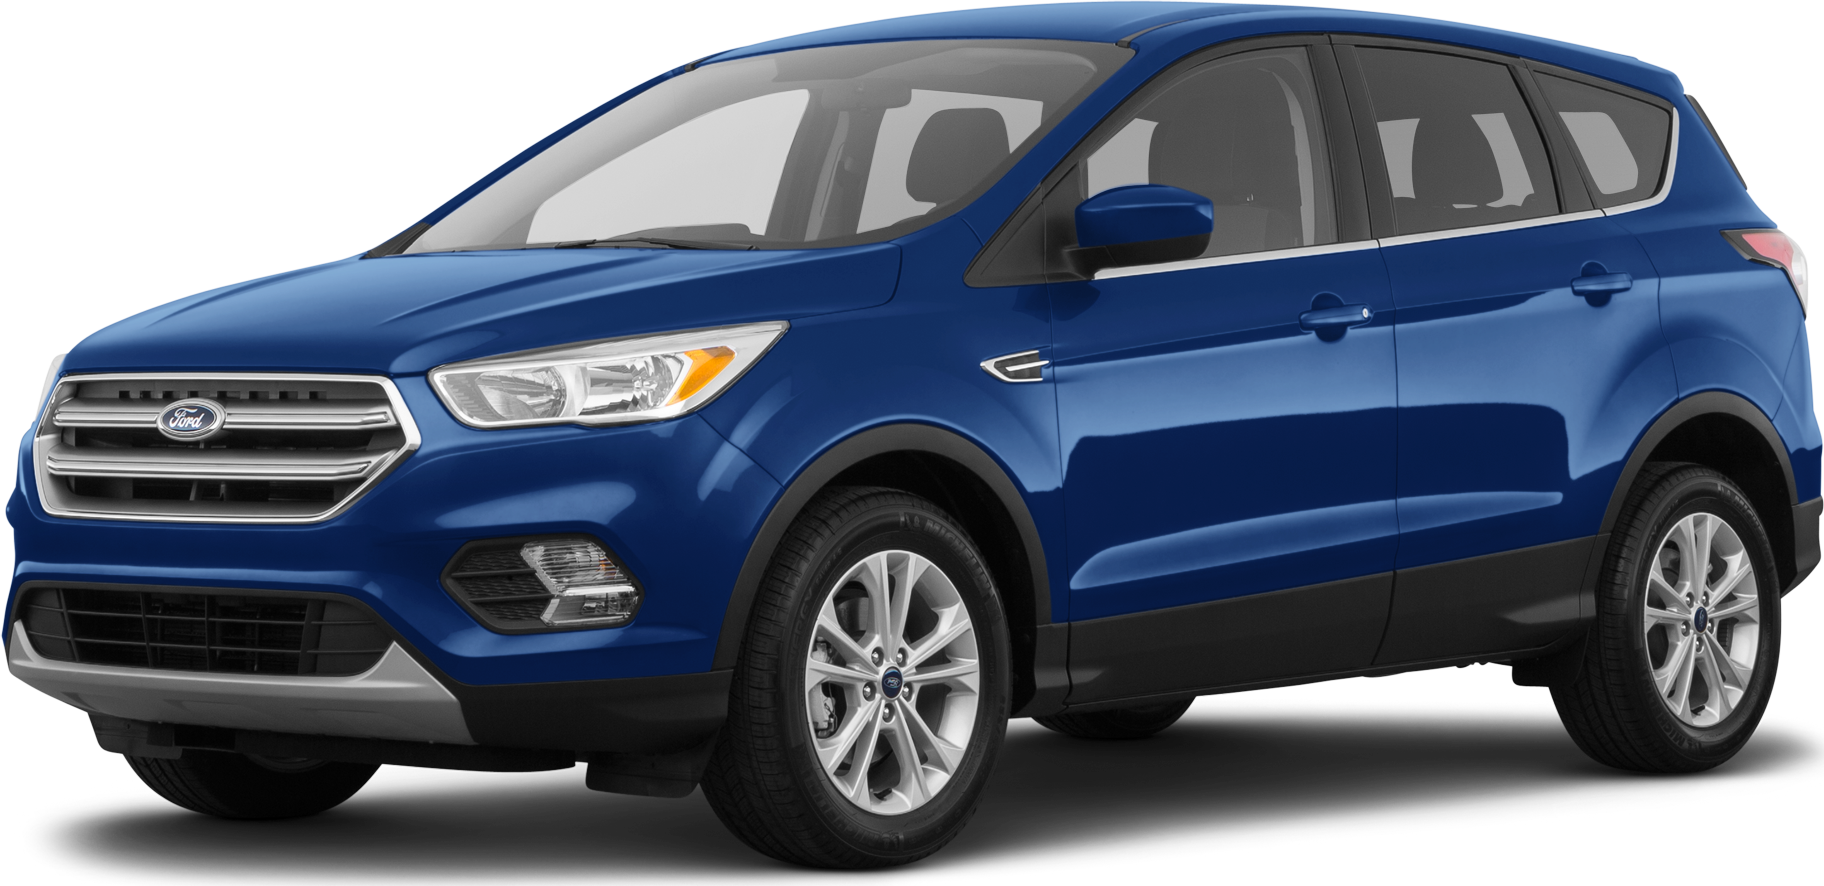 2018 Ford Escape Price, Value, Ratings & Reviews Kelley Blue Book